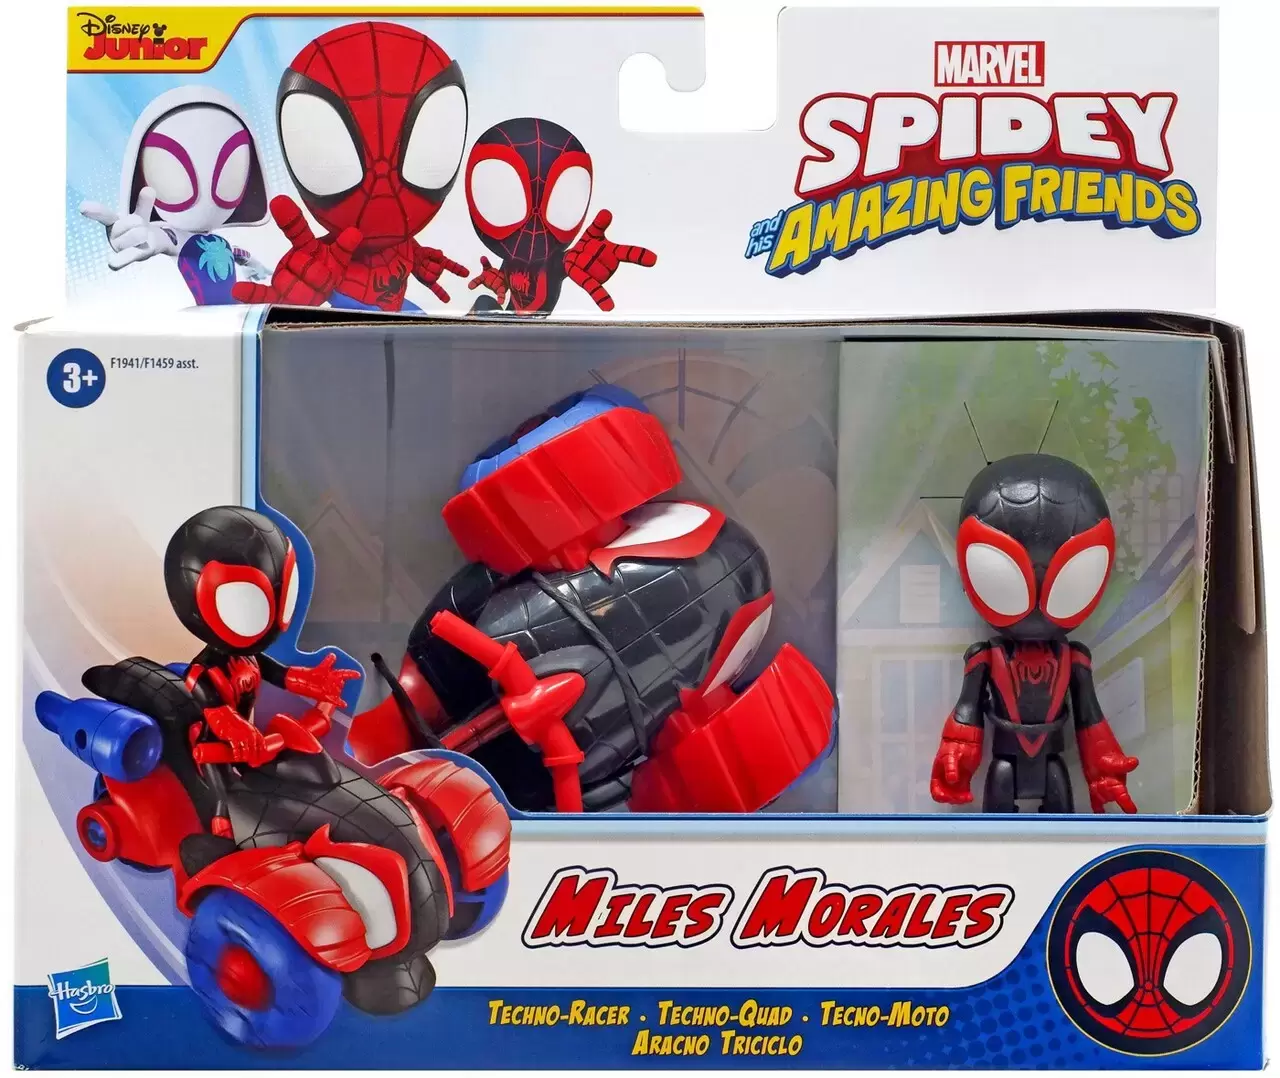 Marvel Spidey and His Amazing Friends Web-Spinners, Miles Morales Spider-Man  Figure - Marvel